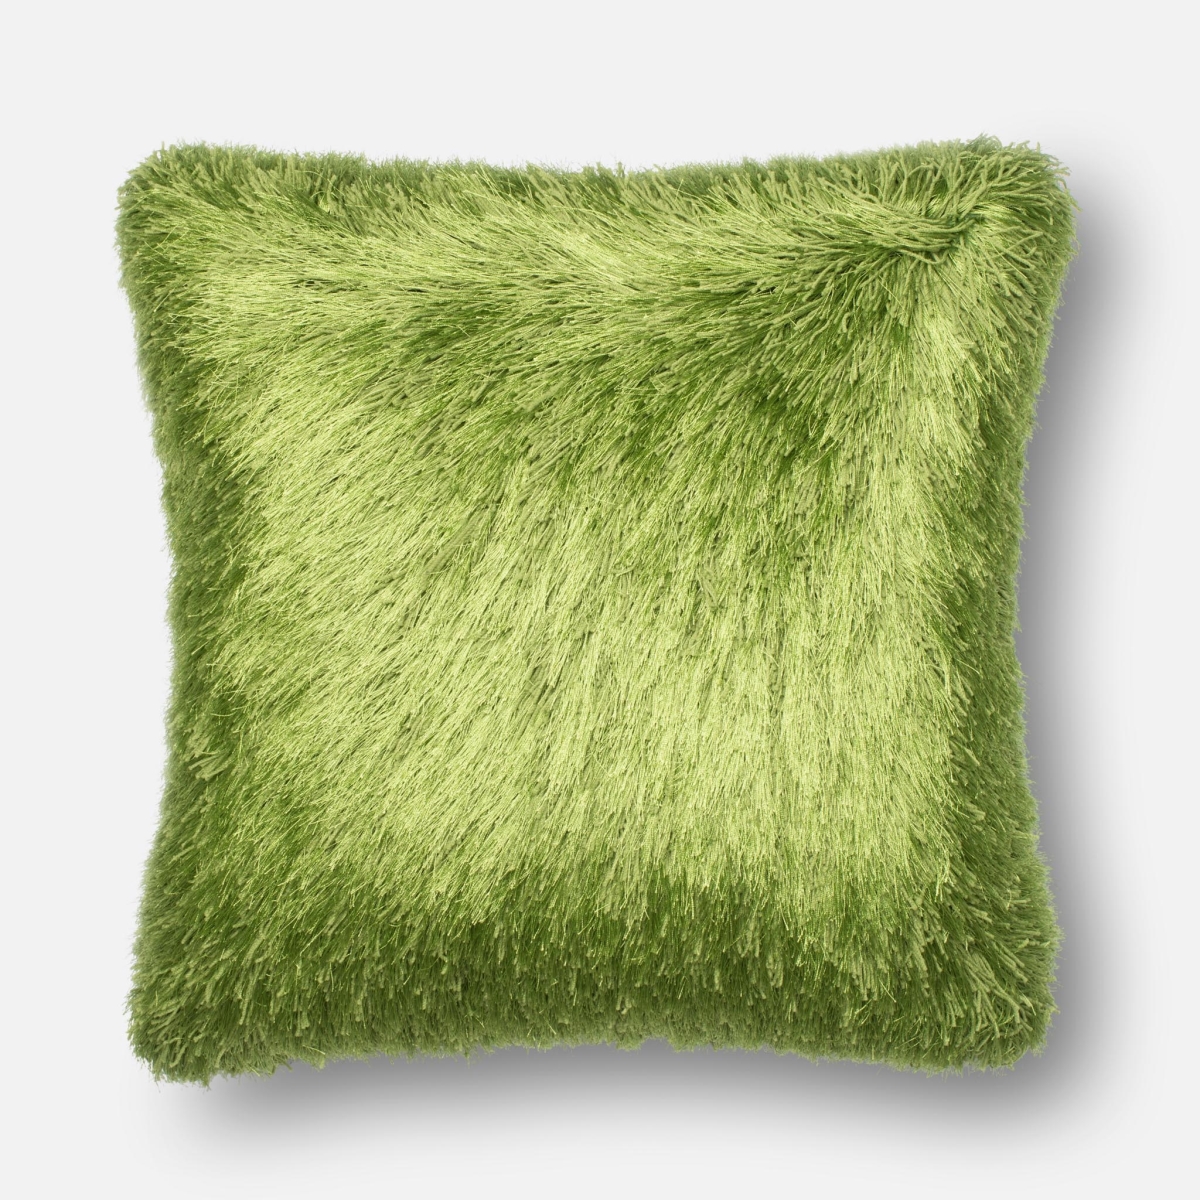 Picture of Loloi Rugs DSETP0245GR00PIL3 22 x 22 in. Decorative Down Filled Pillow with Cover, Green